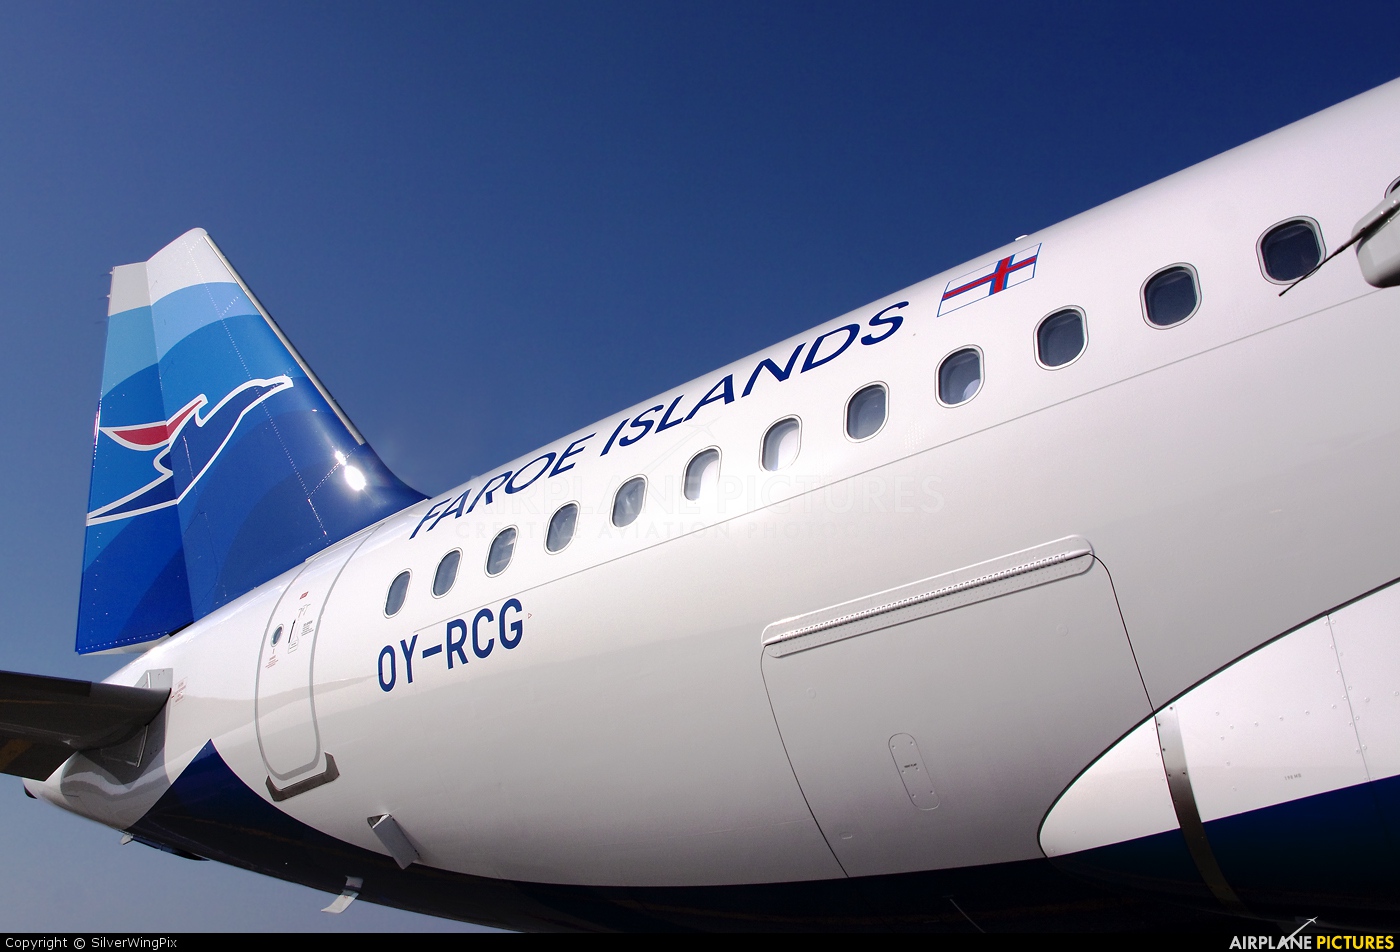 Atlantic Airways OY-RCG aircraft at Undisclosed location